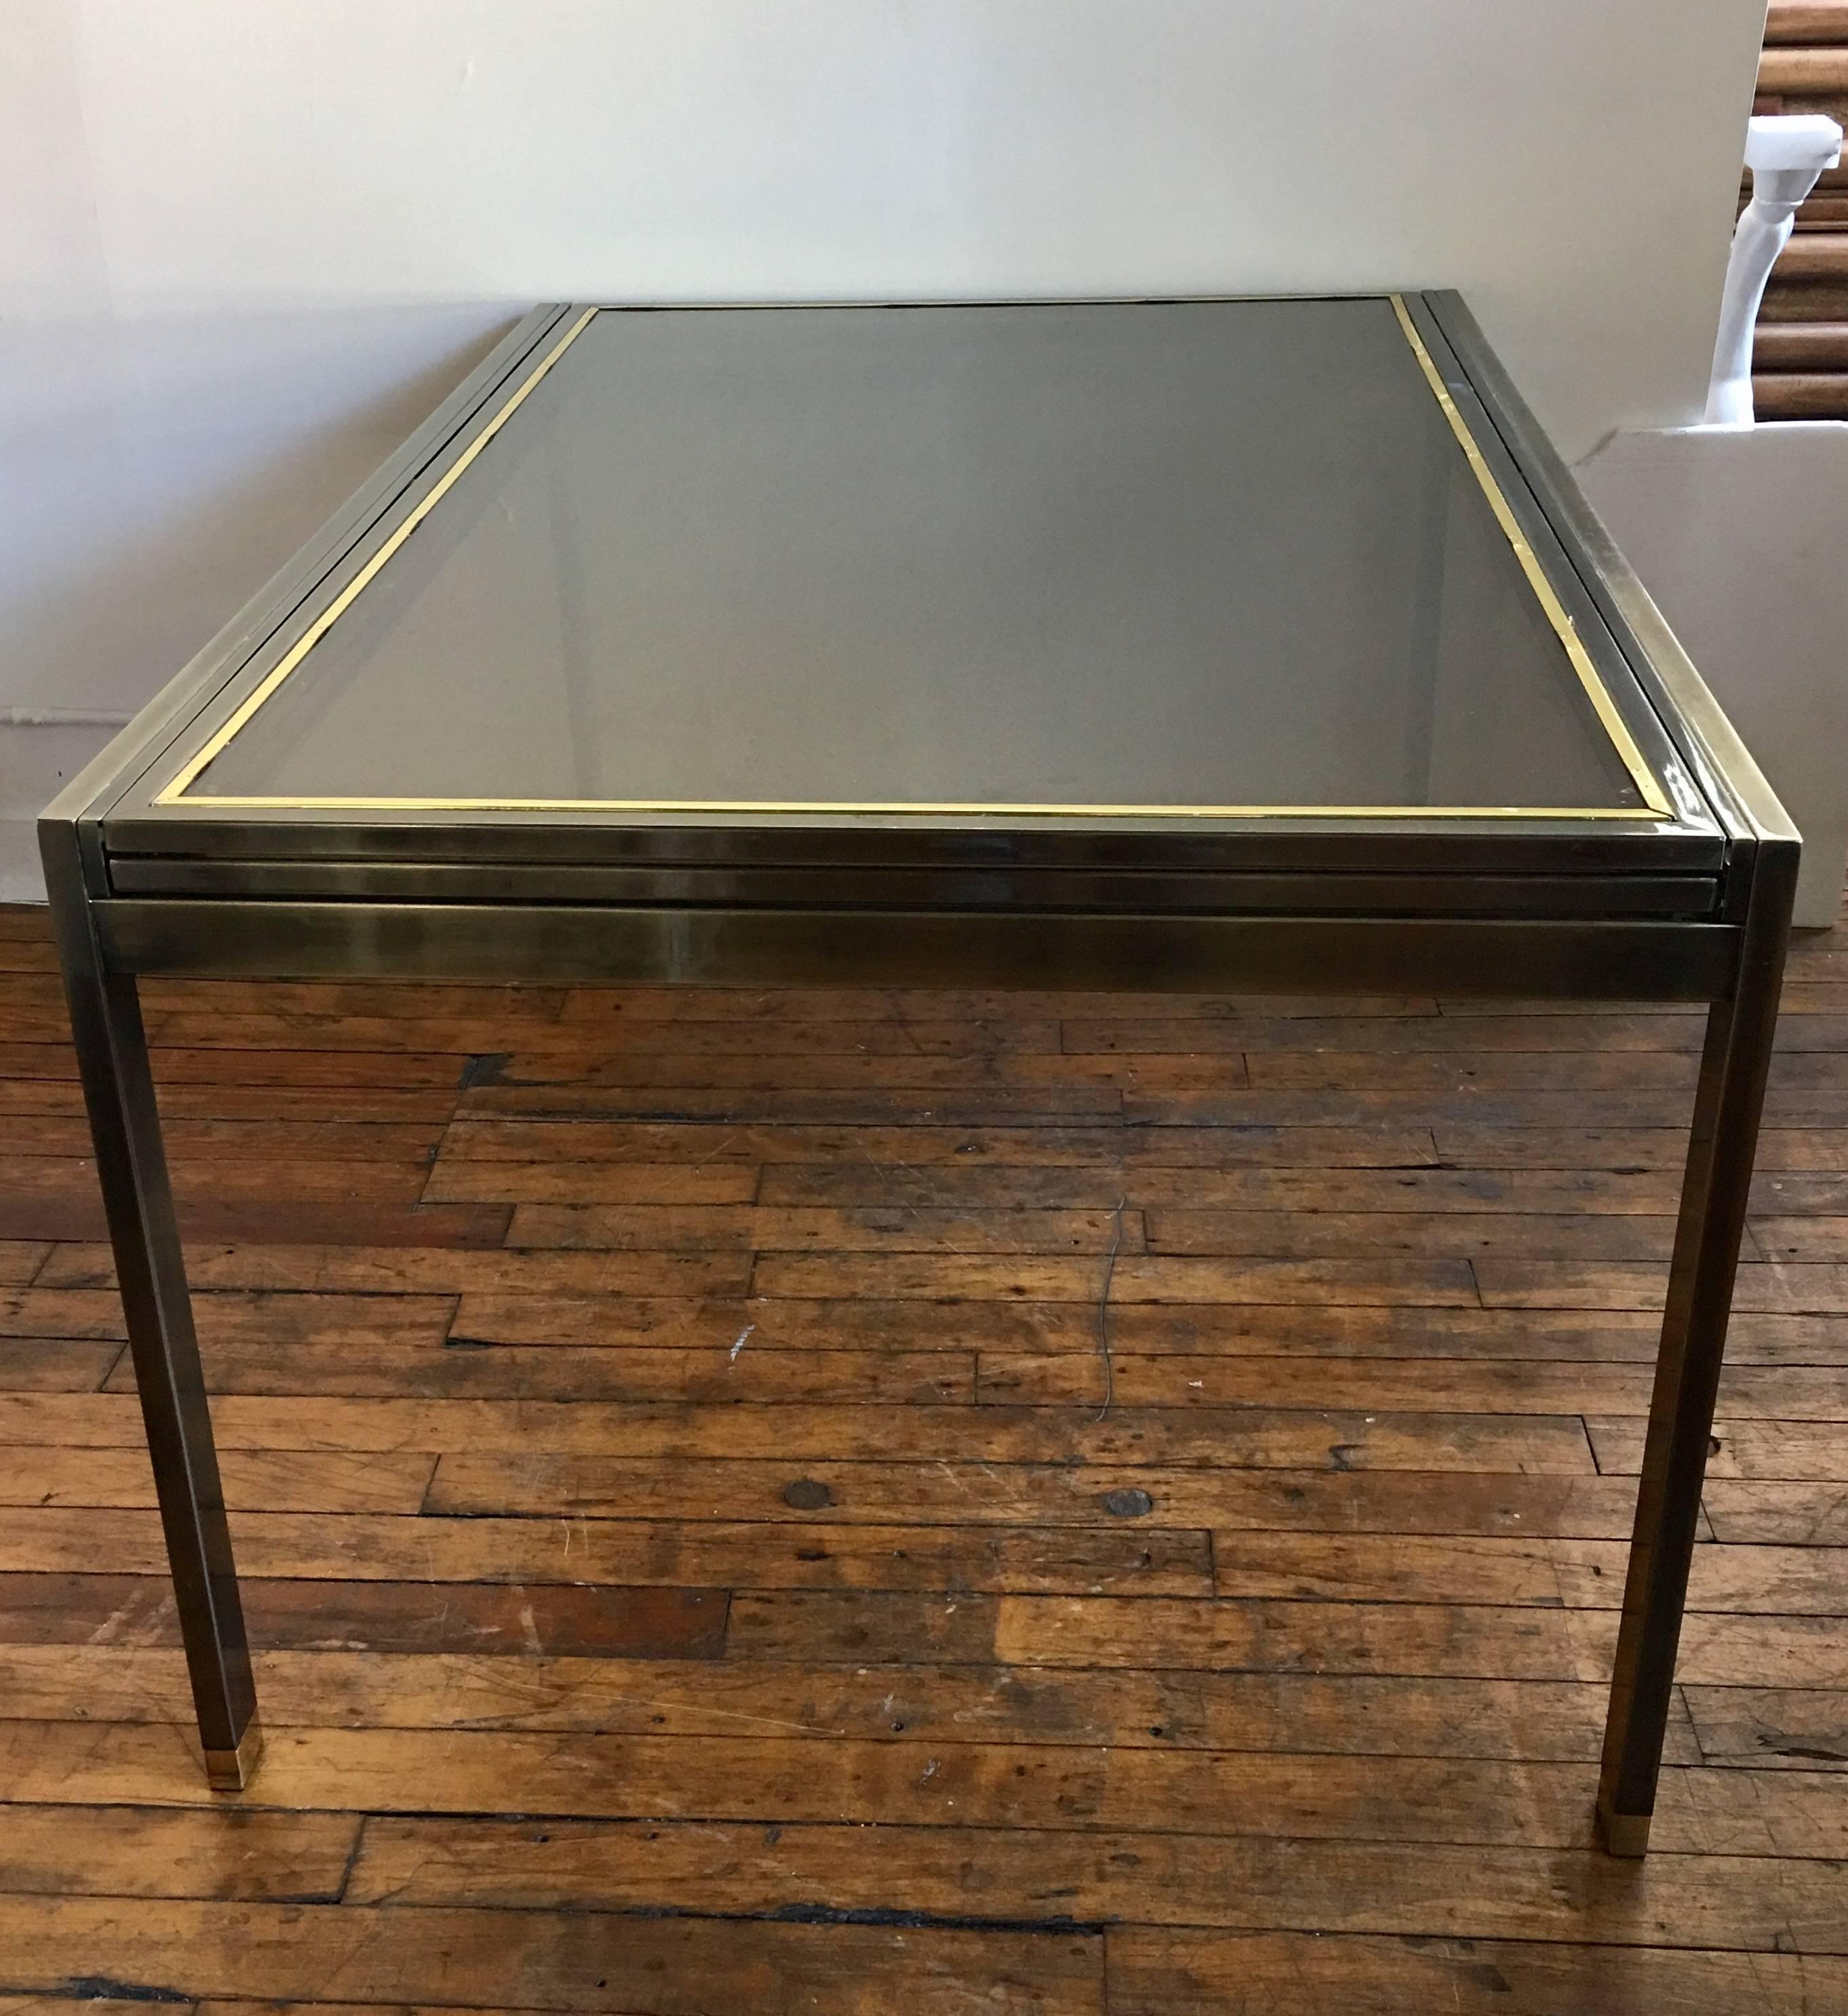 Mixed metal patinated and polished brass and glass extension dining table, Mastercraft Directoire style. Neoclassical style X-form Mid-Century Modern design featuring a draw leaf extension feature that makes this smoked glass table one very long